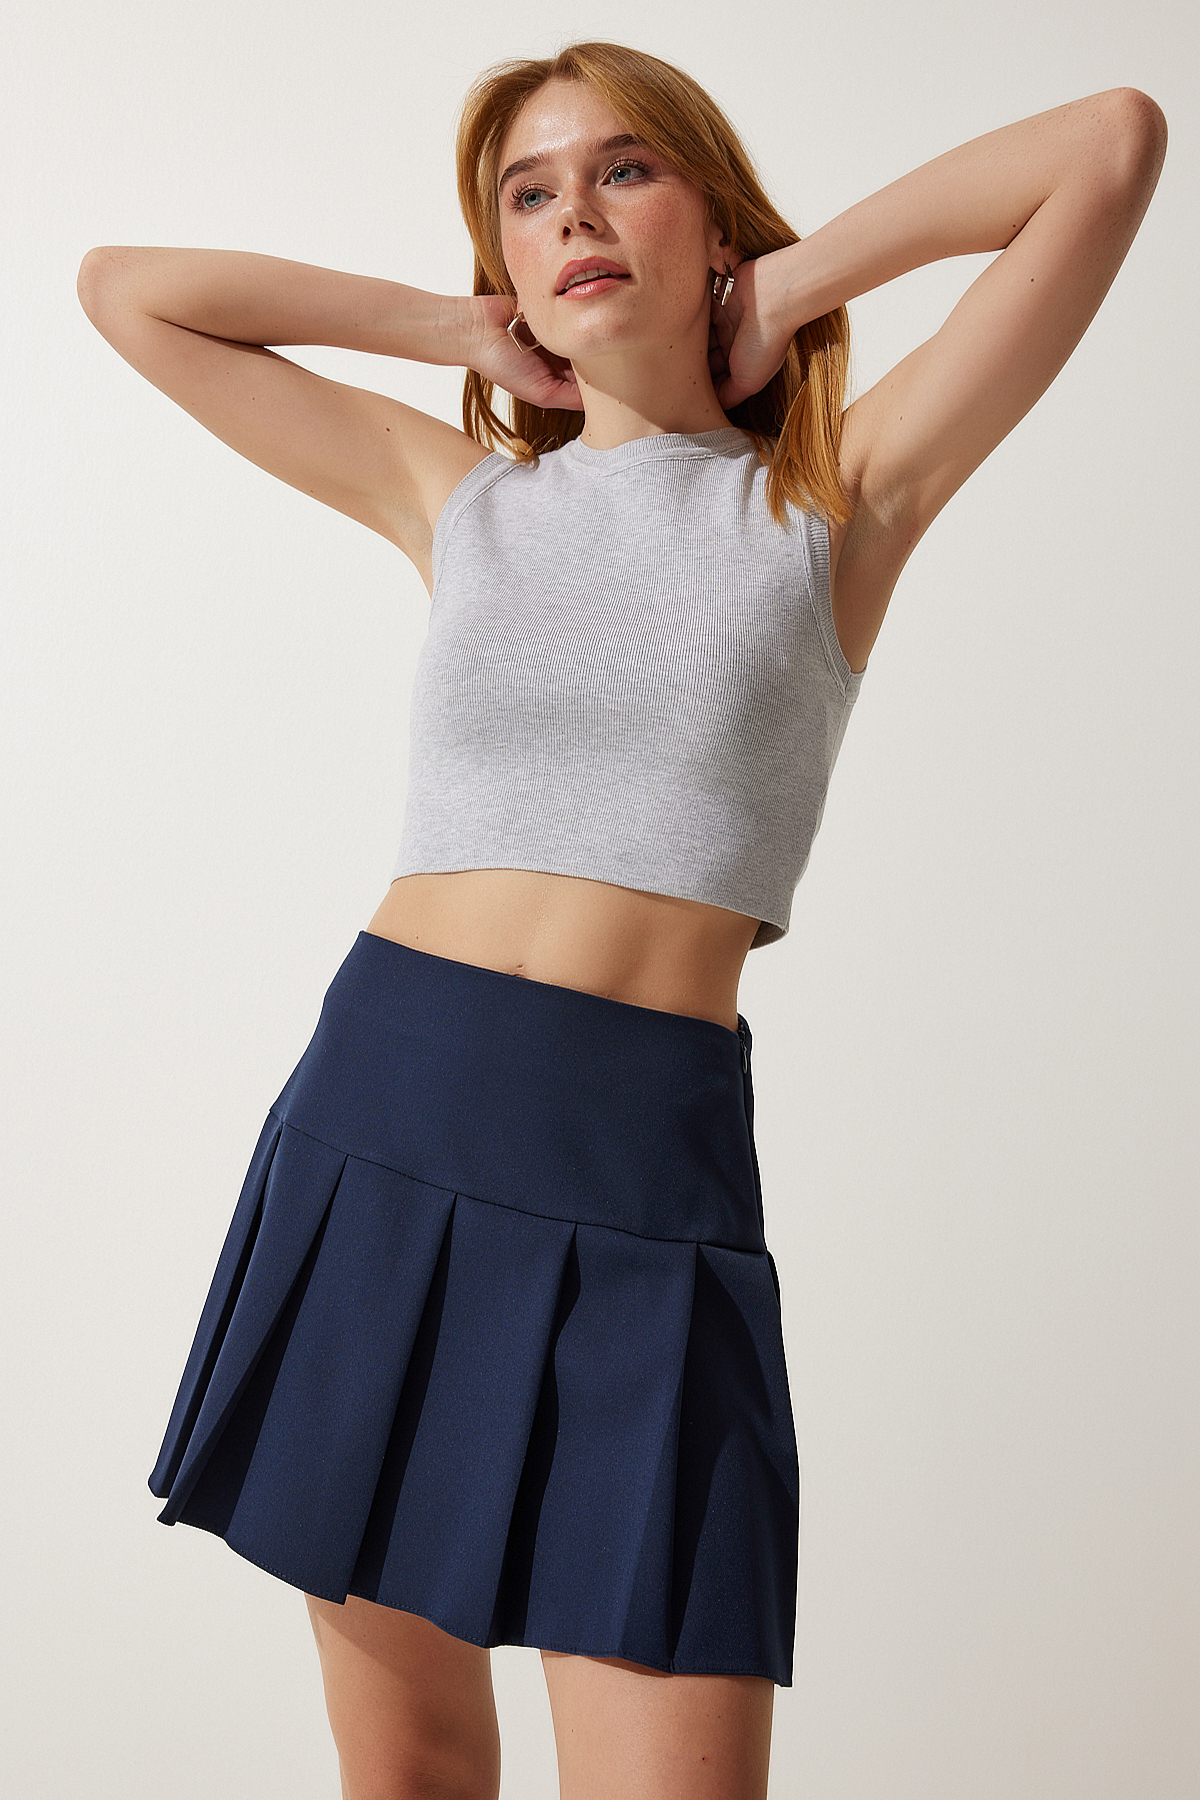 Happiness İstanbul Women's Navy Blue Pleated Mini Woven Skirt